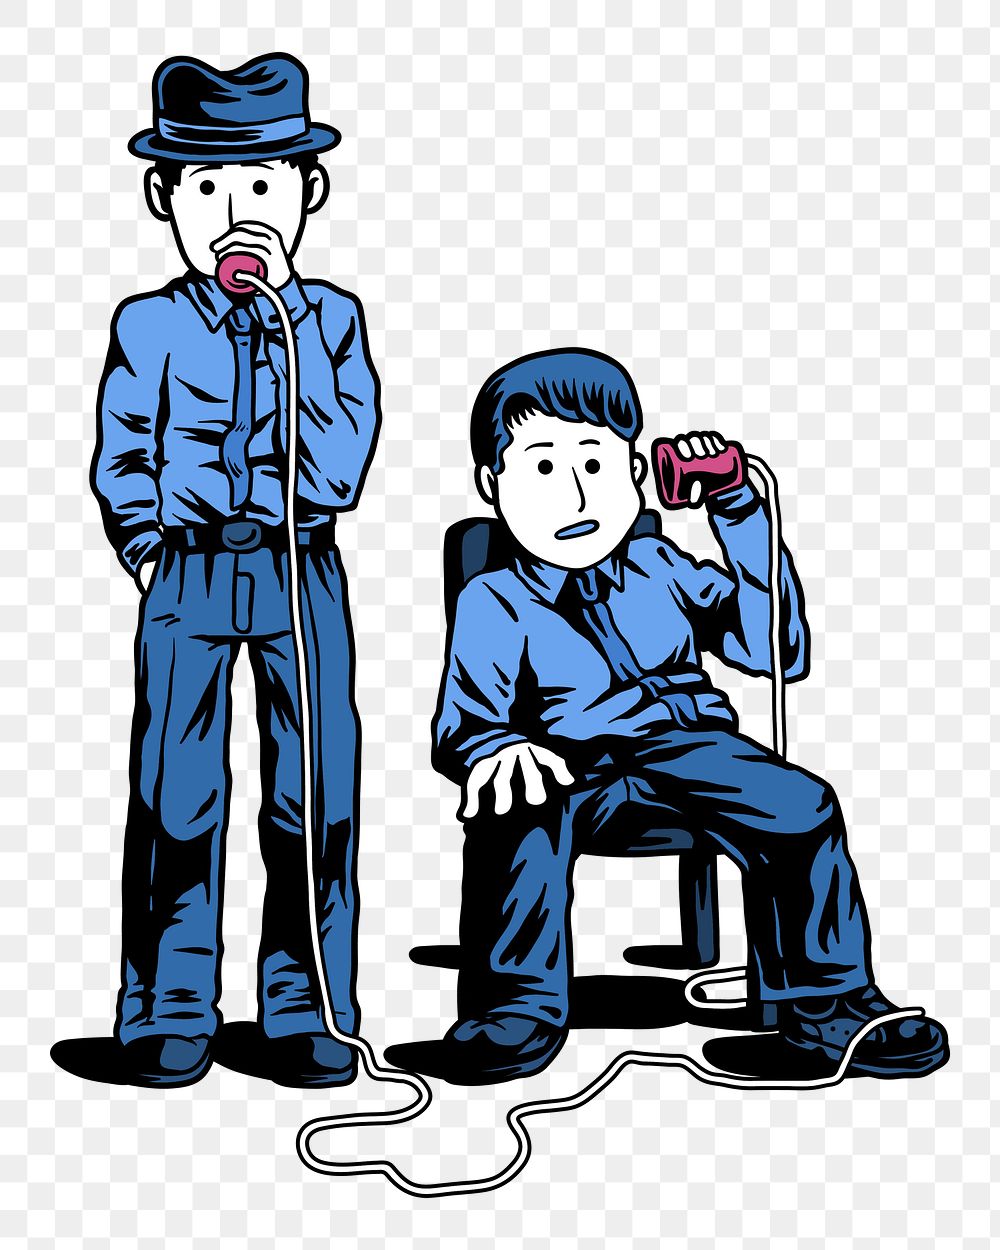 Png Two detectives talking through cups illustration element, transparent background